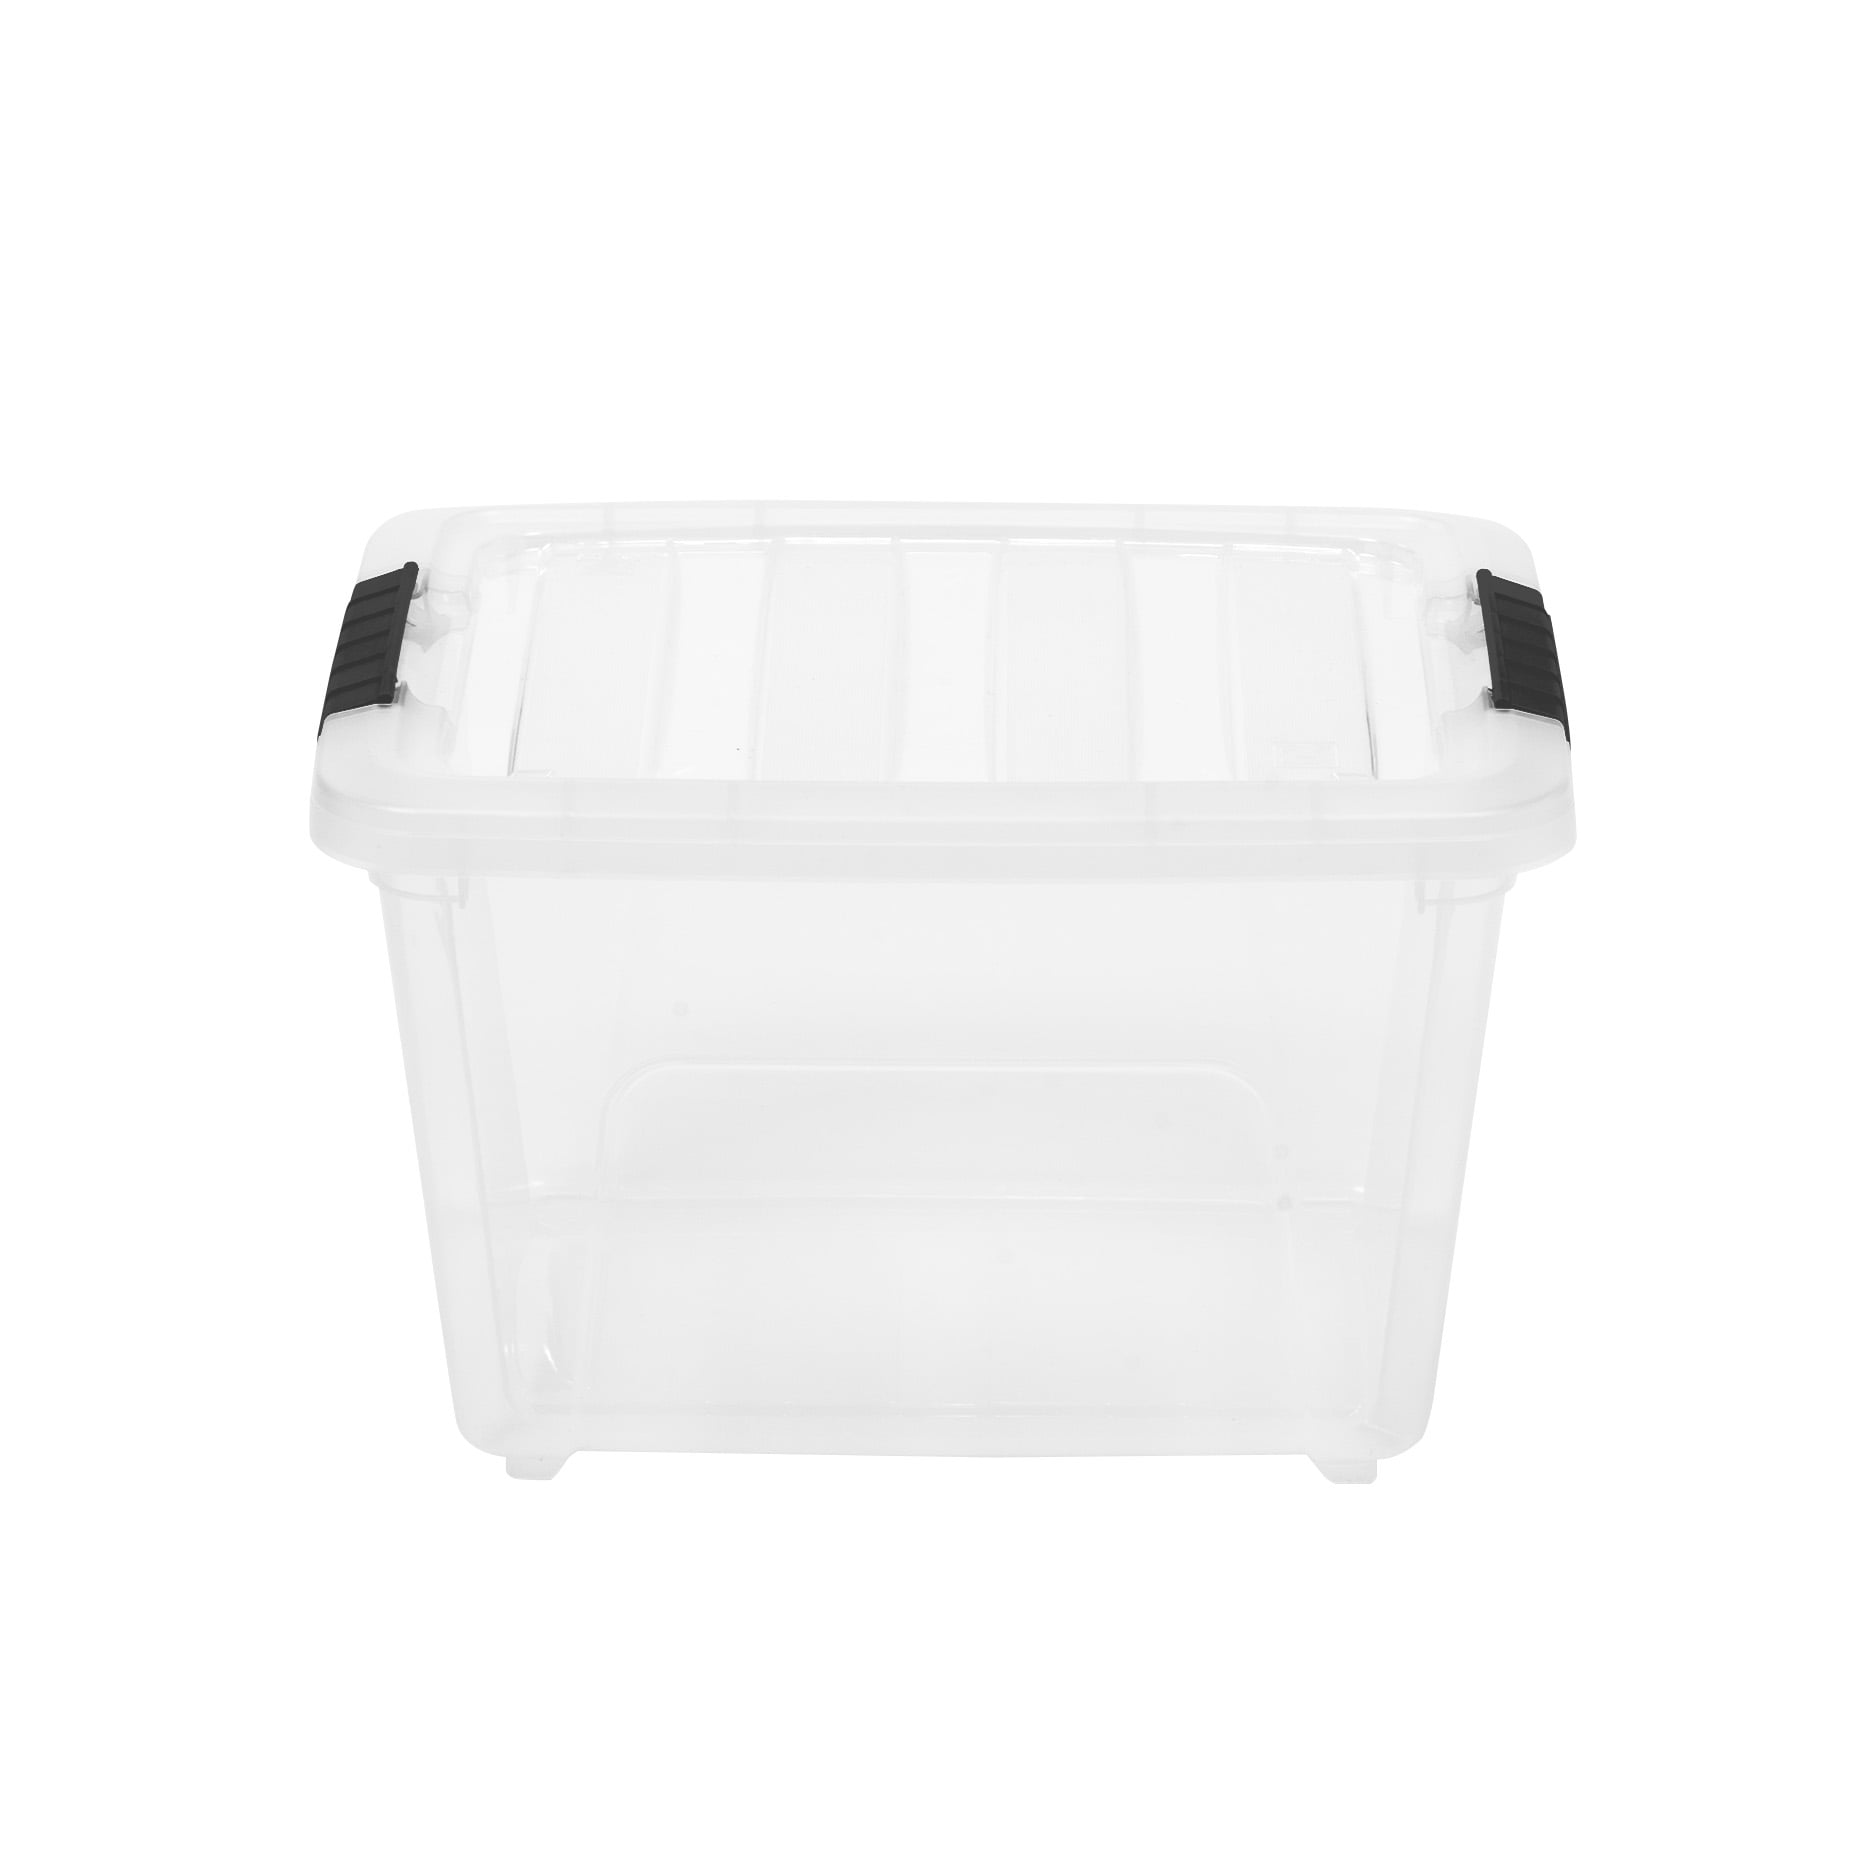 Wham Box Storage Boxes Organisers Tidy Containers 